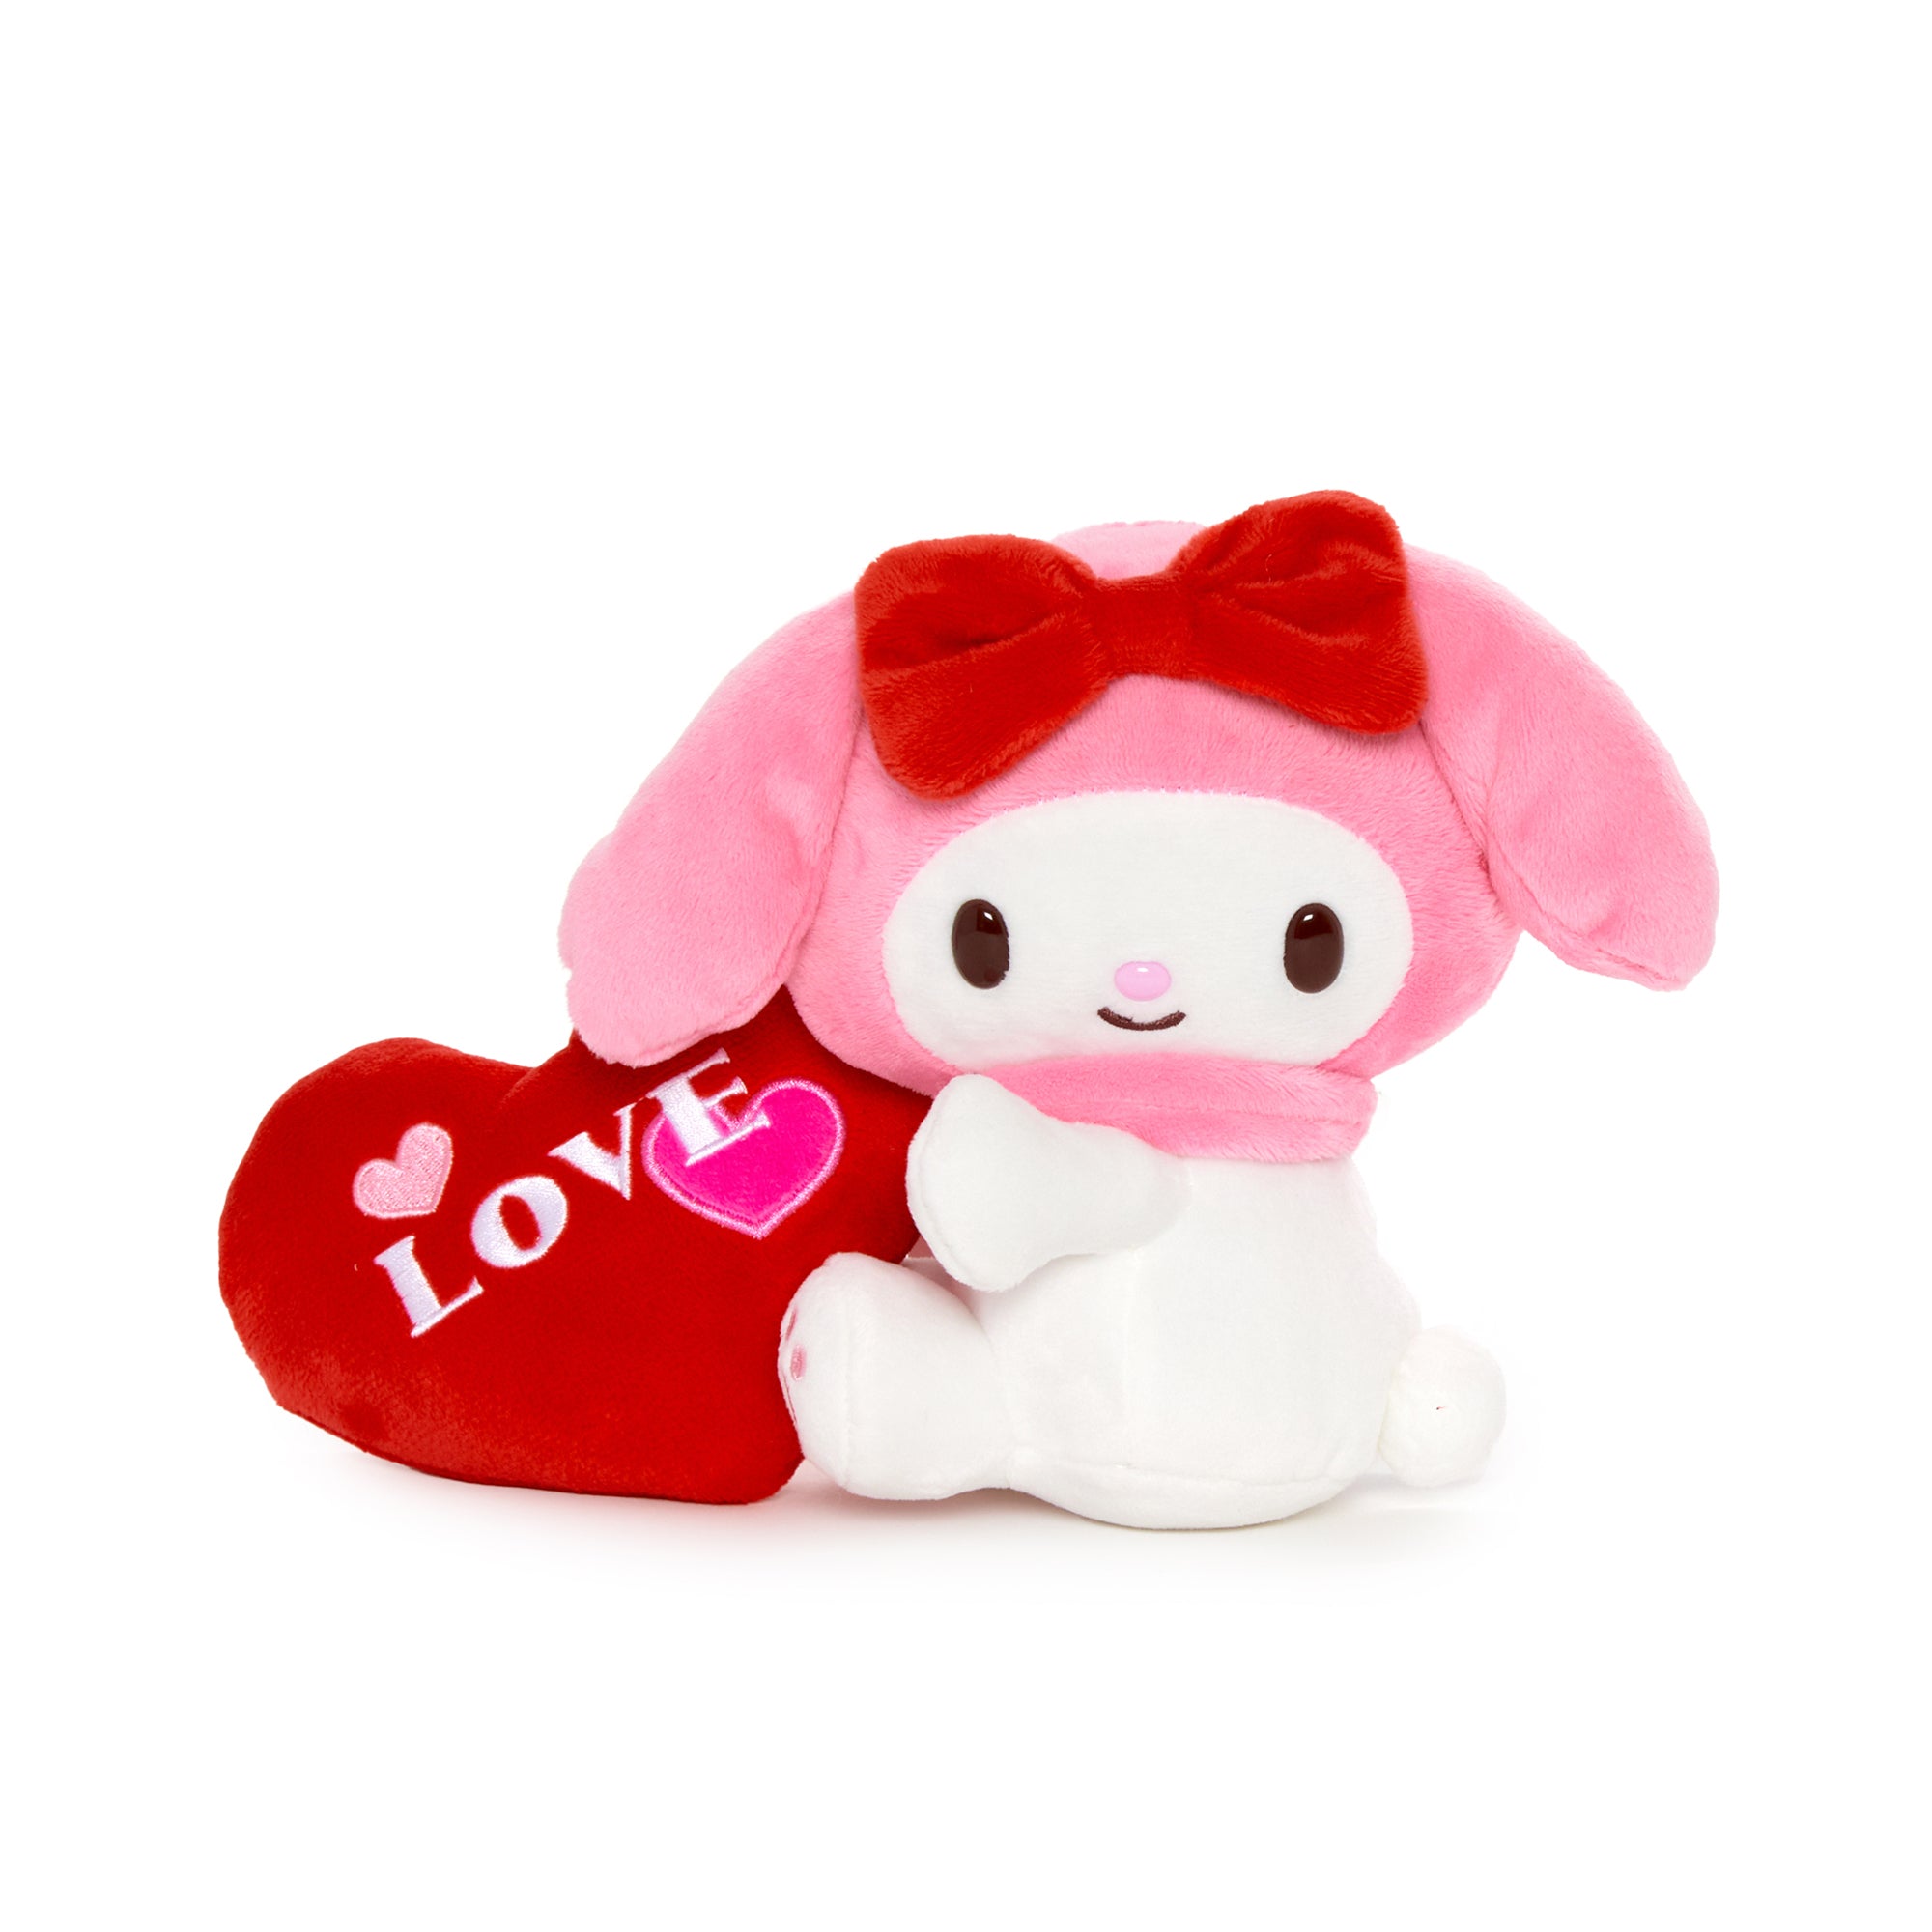 Hello Kitty on X: In celebration of Hello Kitty's birthday month, spread a  little extra kindness and connect with friends around the world, instantly,  with Hello Kitty and Friends online greeting cards!